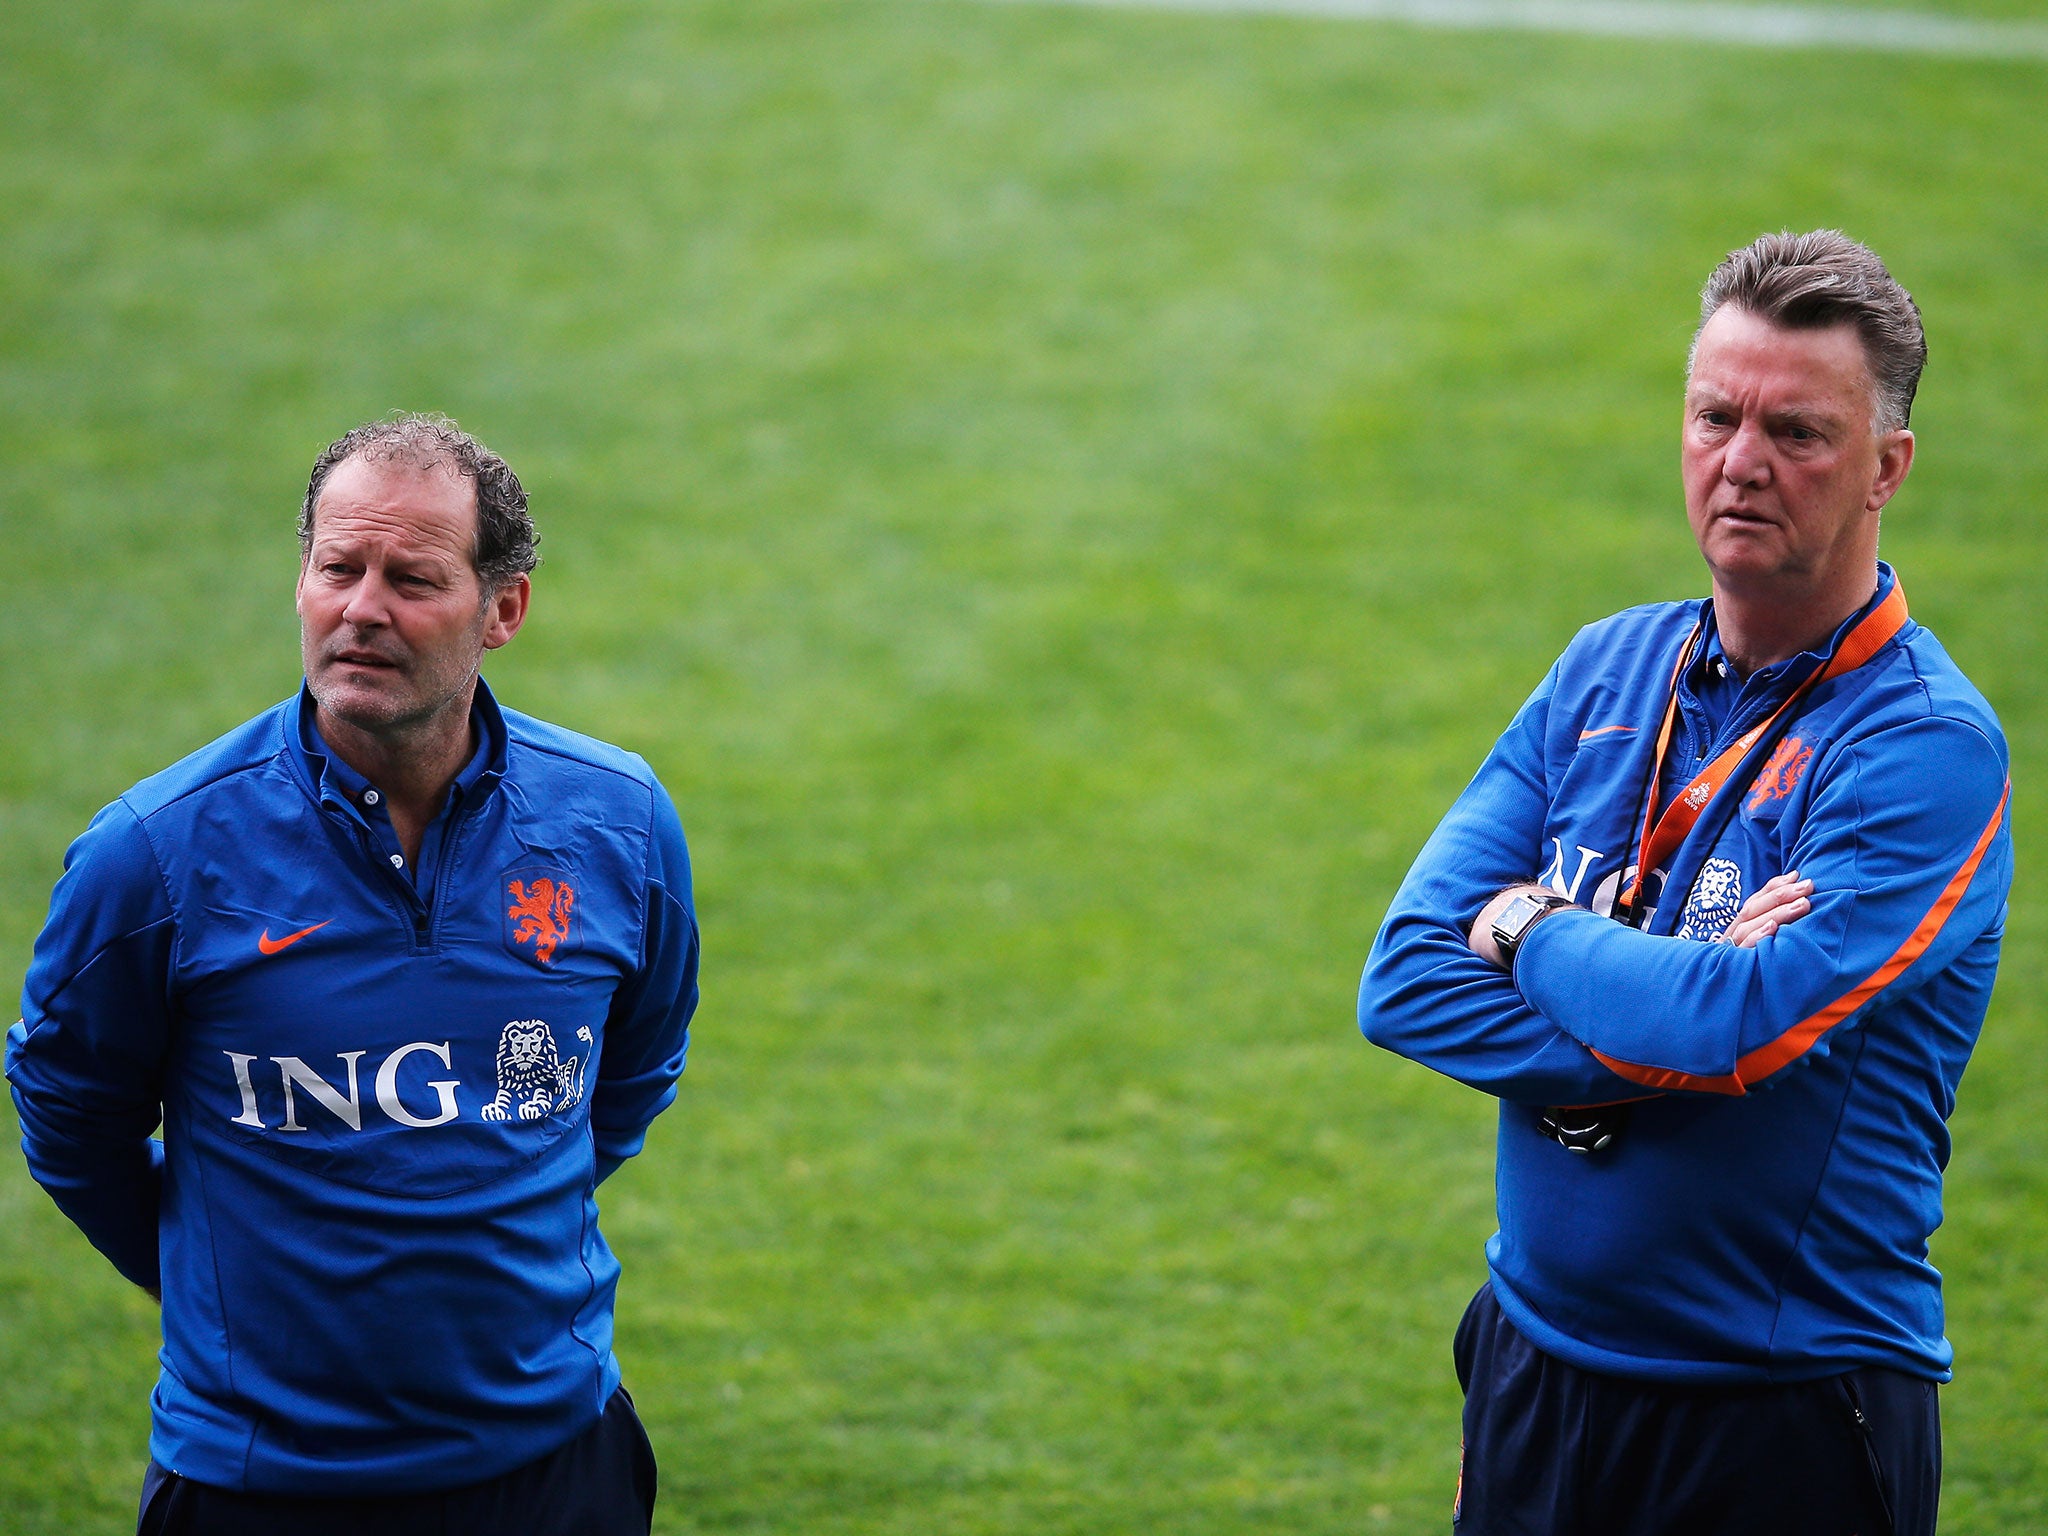 Danny Blind with Louis van Gaal during the 2014 World Cup